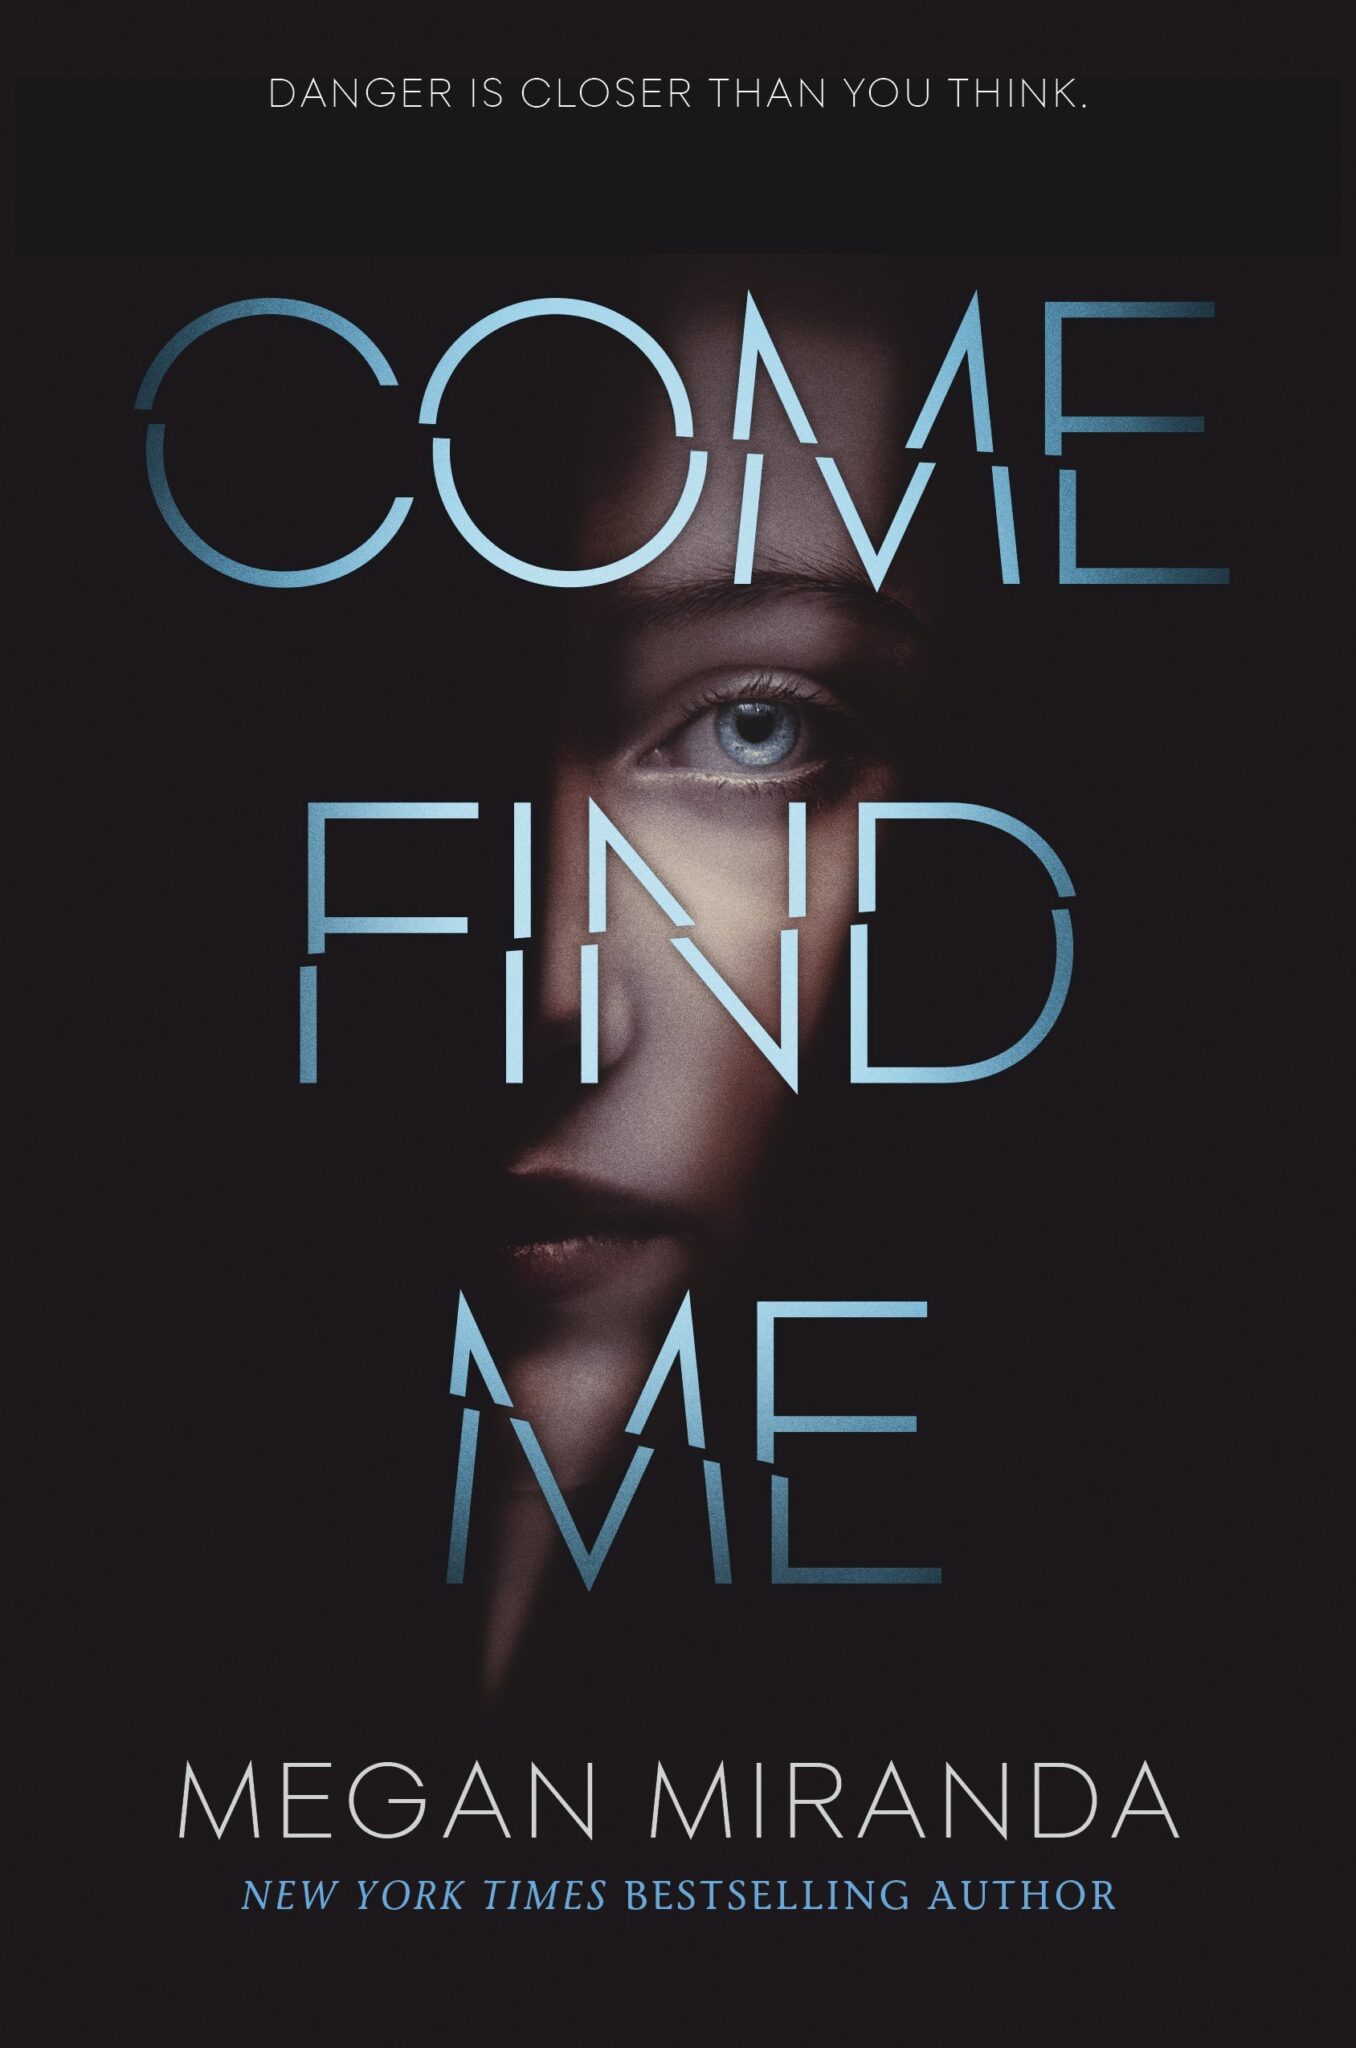 come find me book review